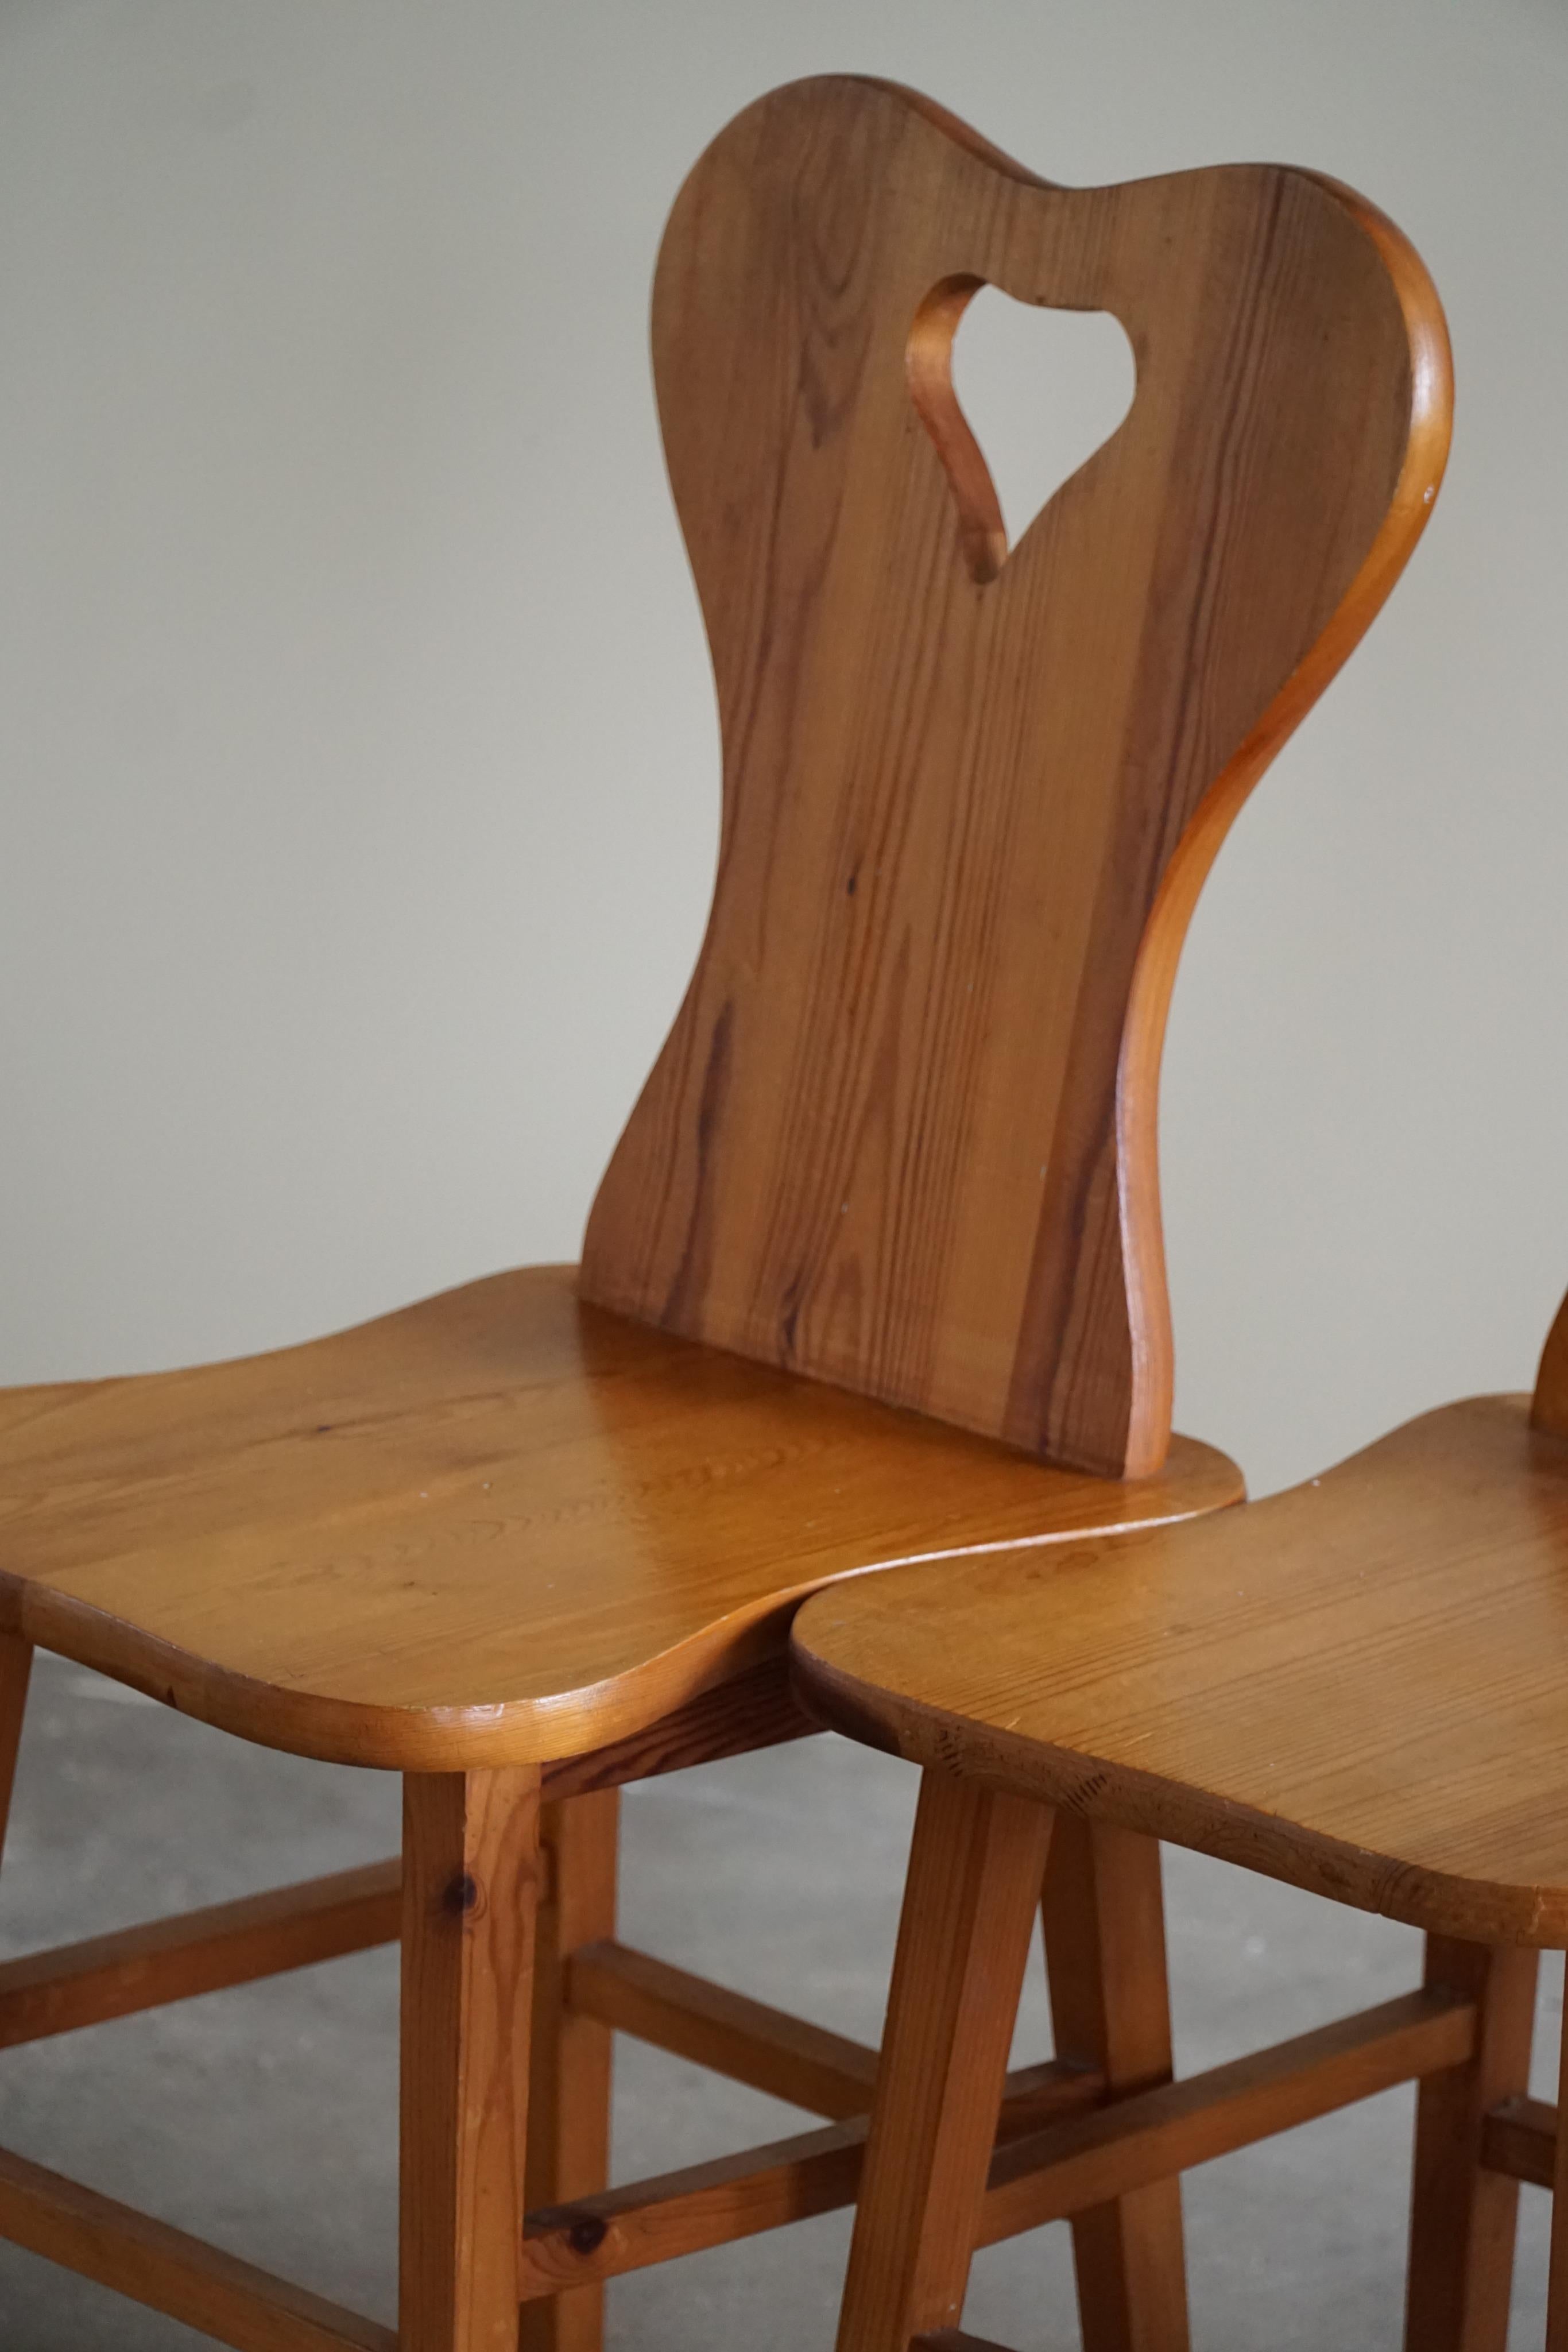 Set of 4 Chairs in Pine, by a Swedish Cabinetmaker, Scandinavian Modern, 1960s For Sale 1